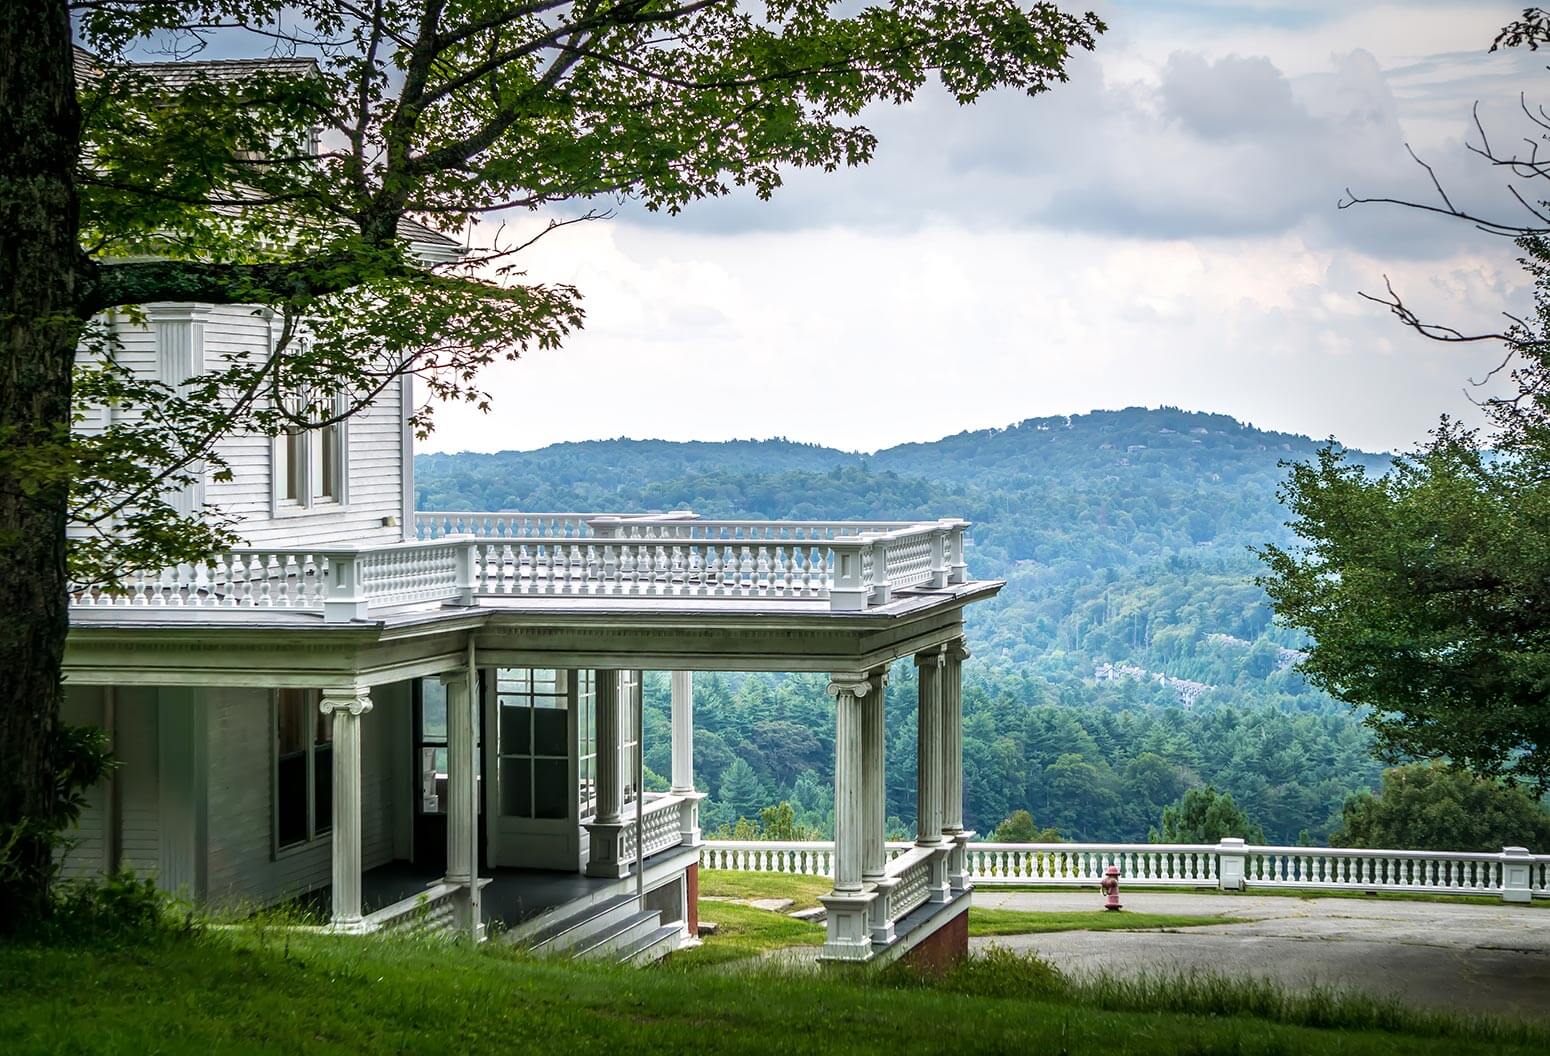 The Moses Cone Manor in the Blue Ridge Mountains